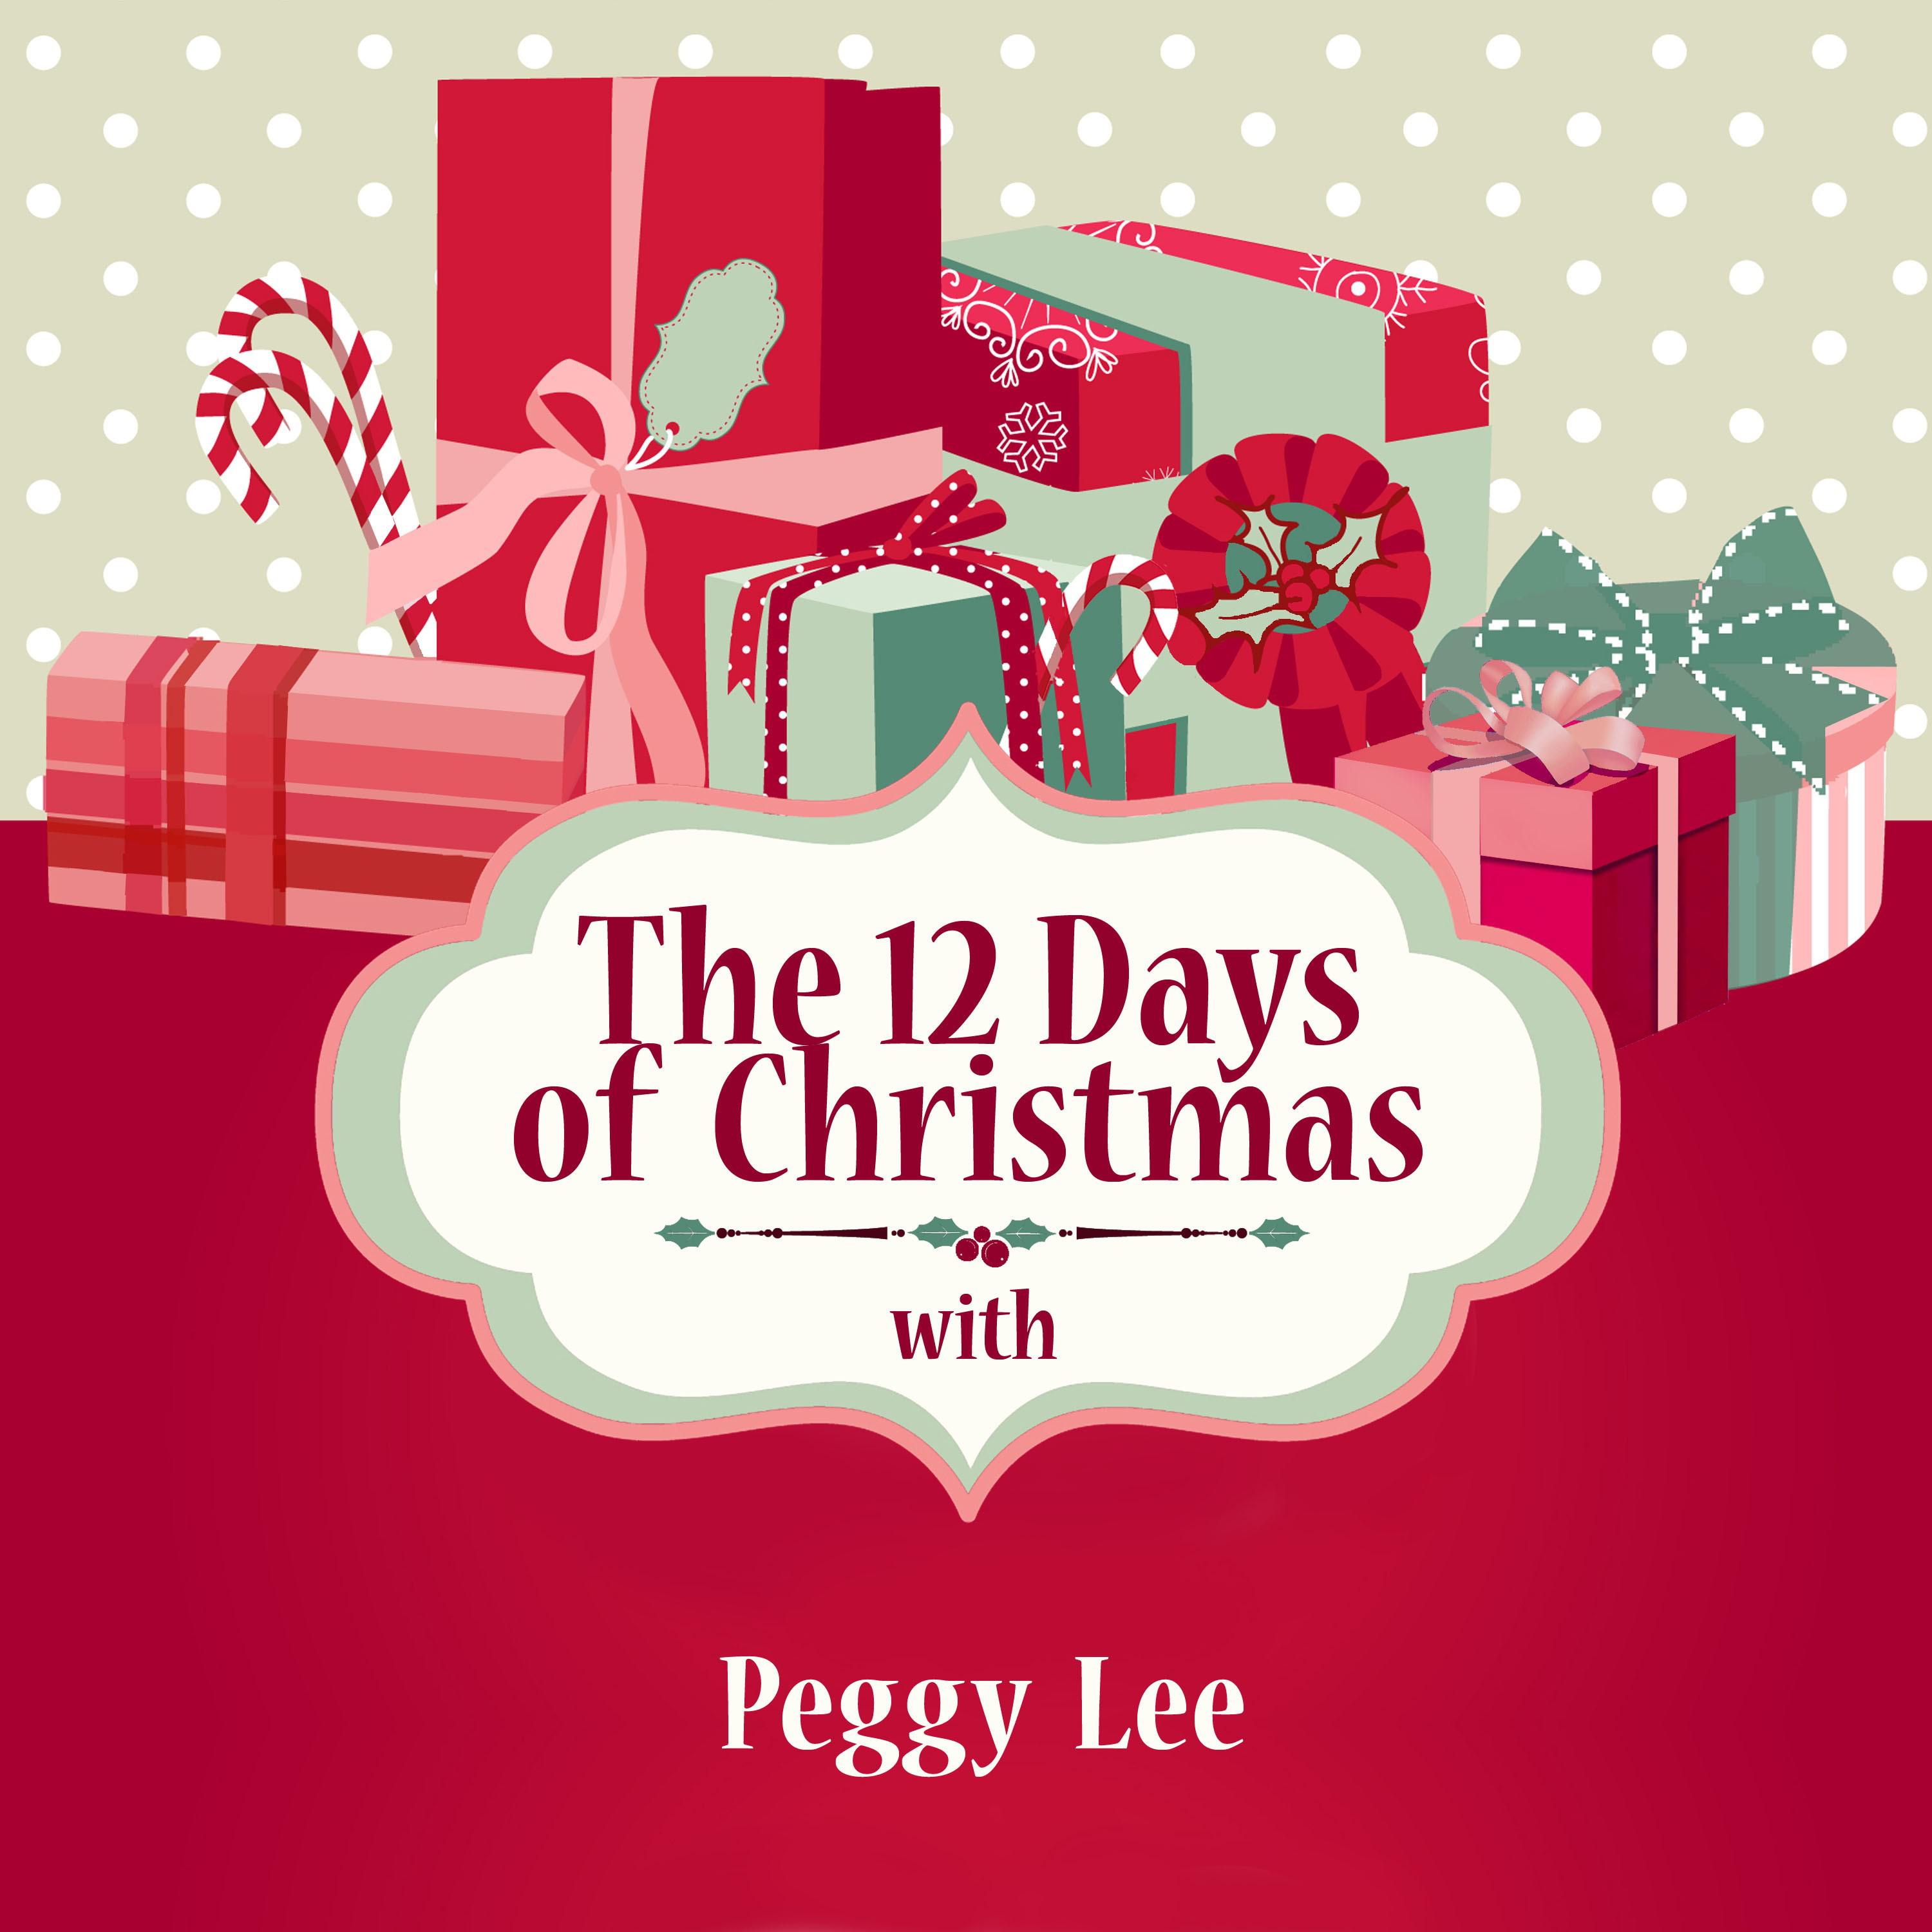 The 12 Days of Christmas with Peggy Lee